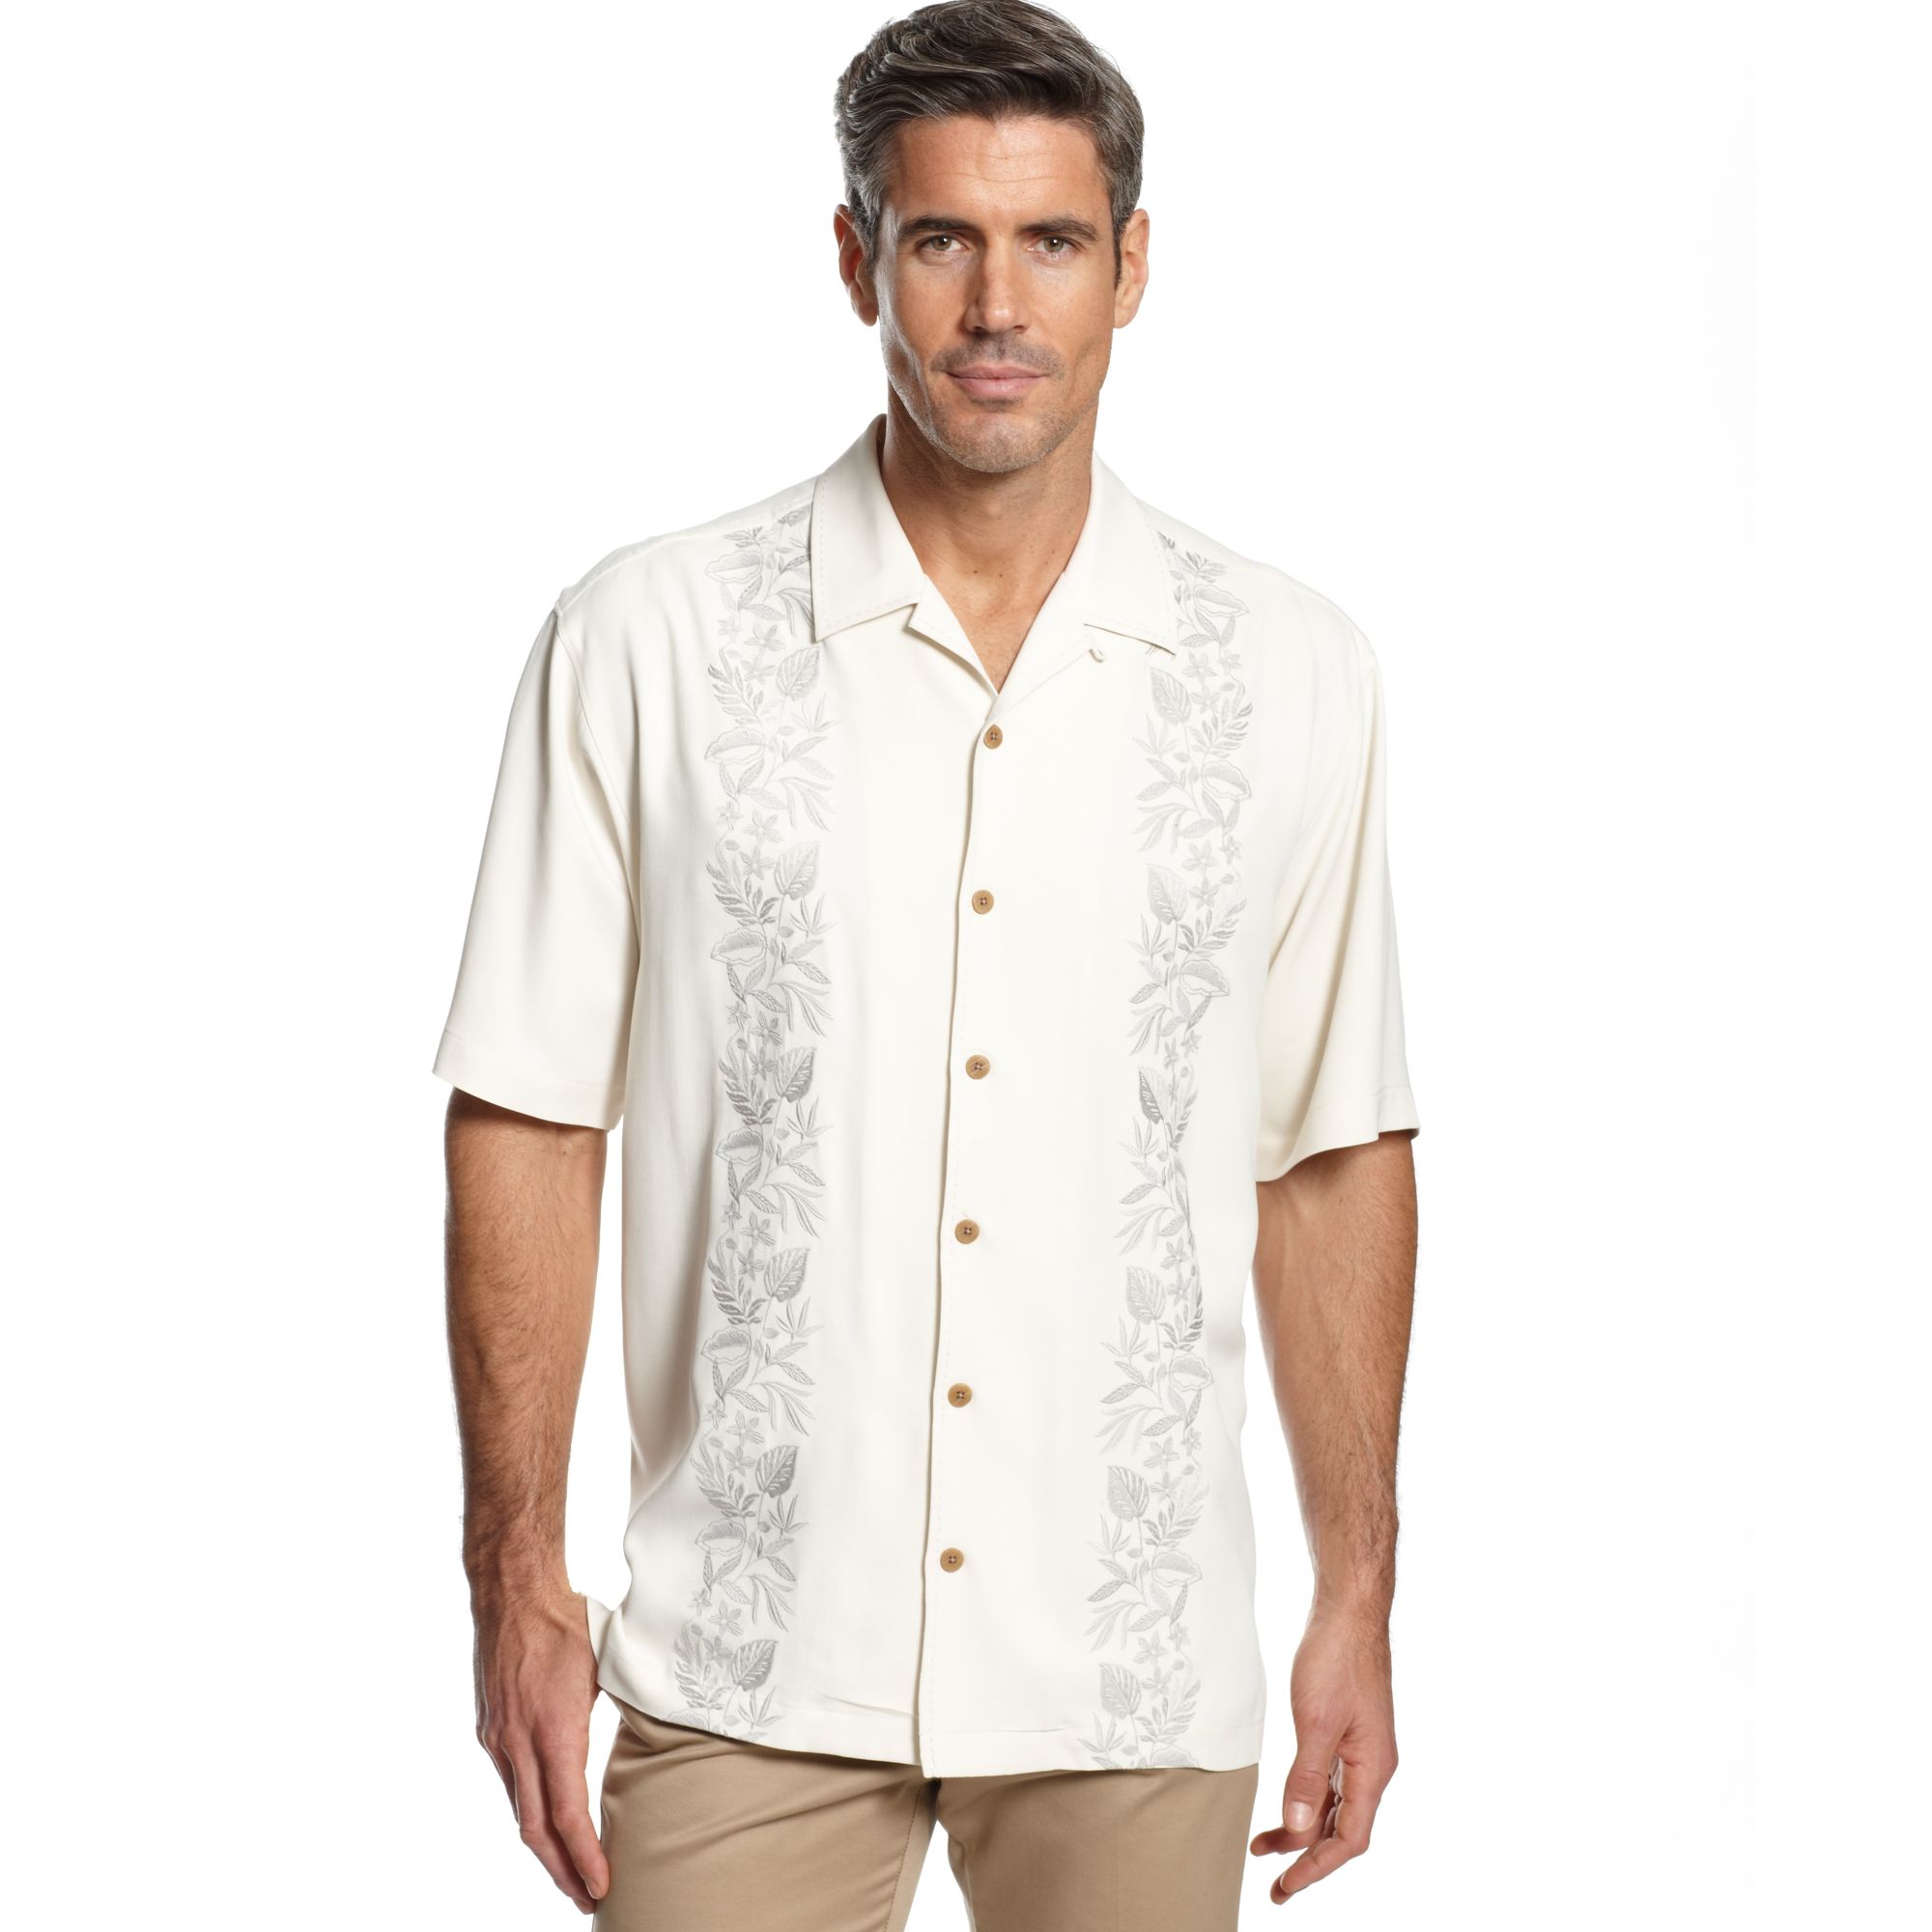 Lyst - Tommy Bahama Road To Havana Short Sleeve Shirt in Natural for Men